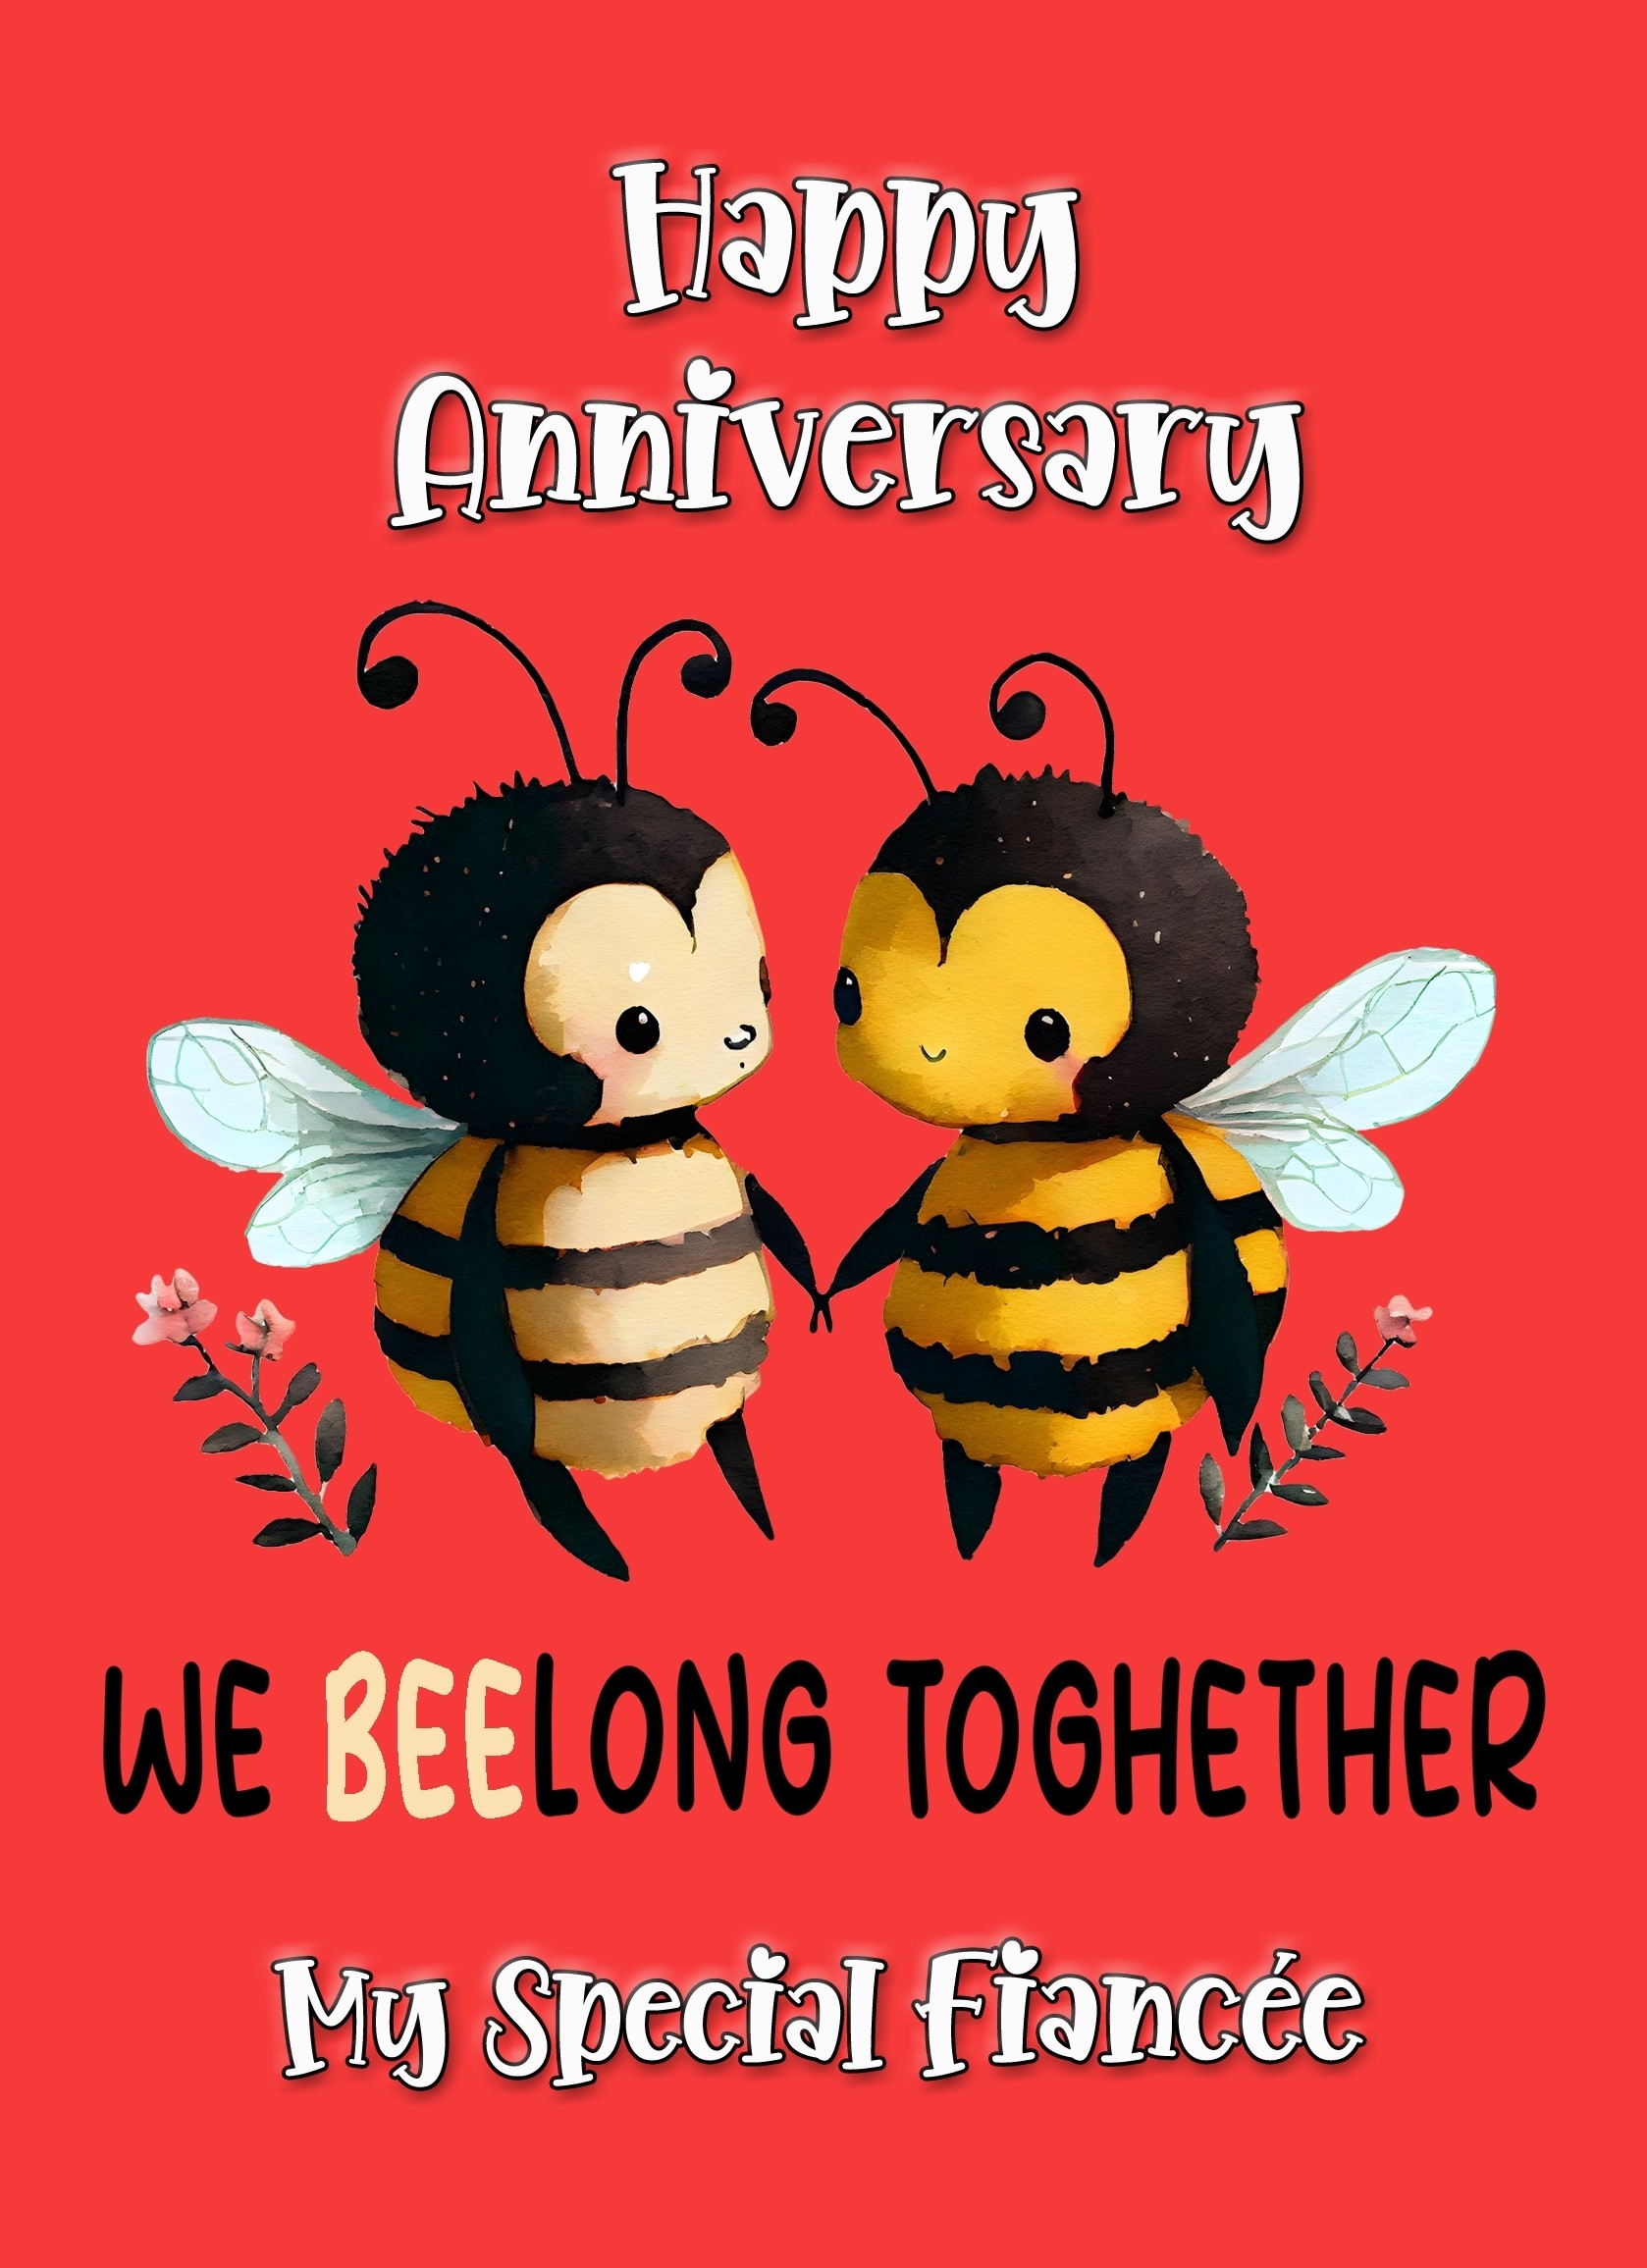 Funny Pun Romantic Anniversary Card for Fiancee (Beelong Together)